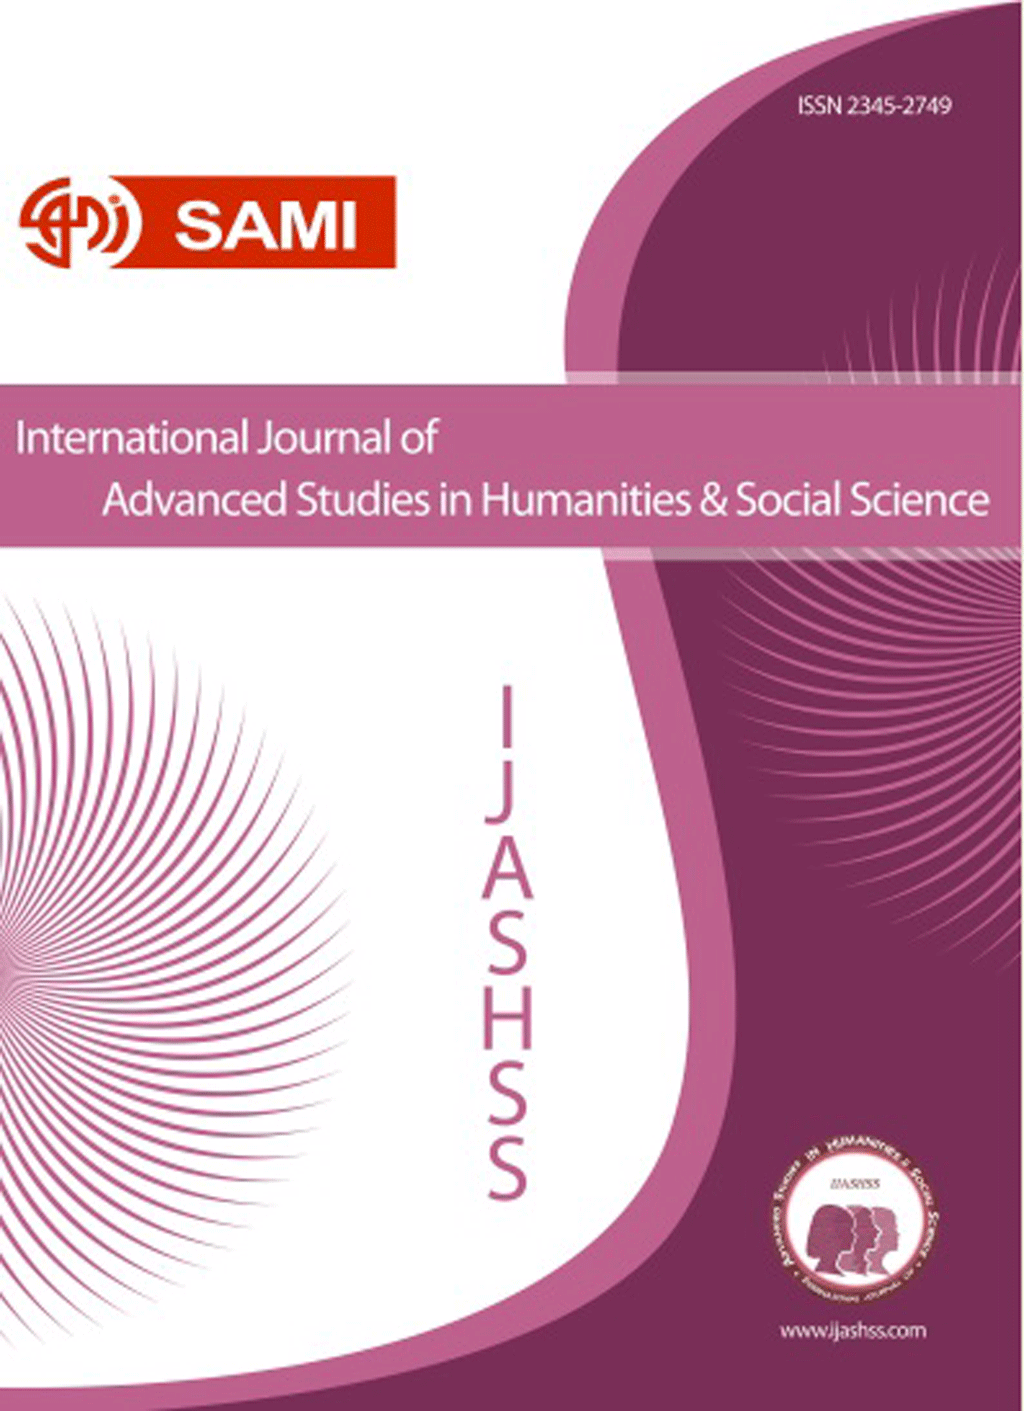 International Journal of Advanced Studies in Humanities and Social Science - July 2017, Volume 6 - Issue 3